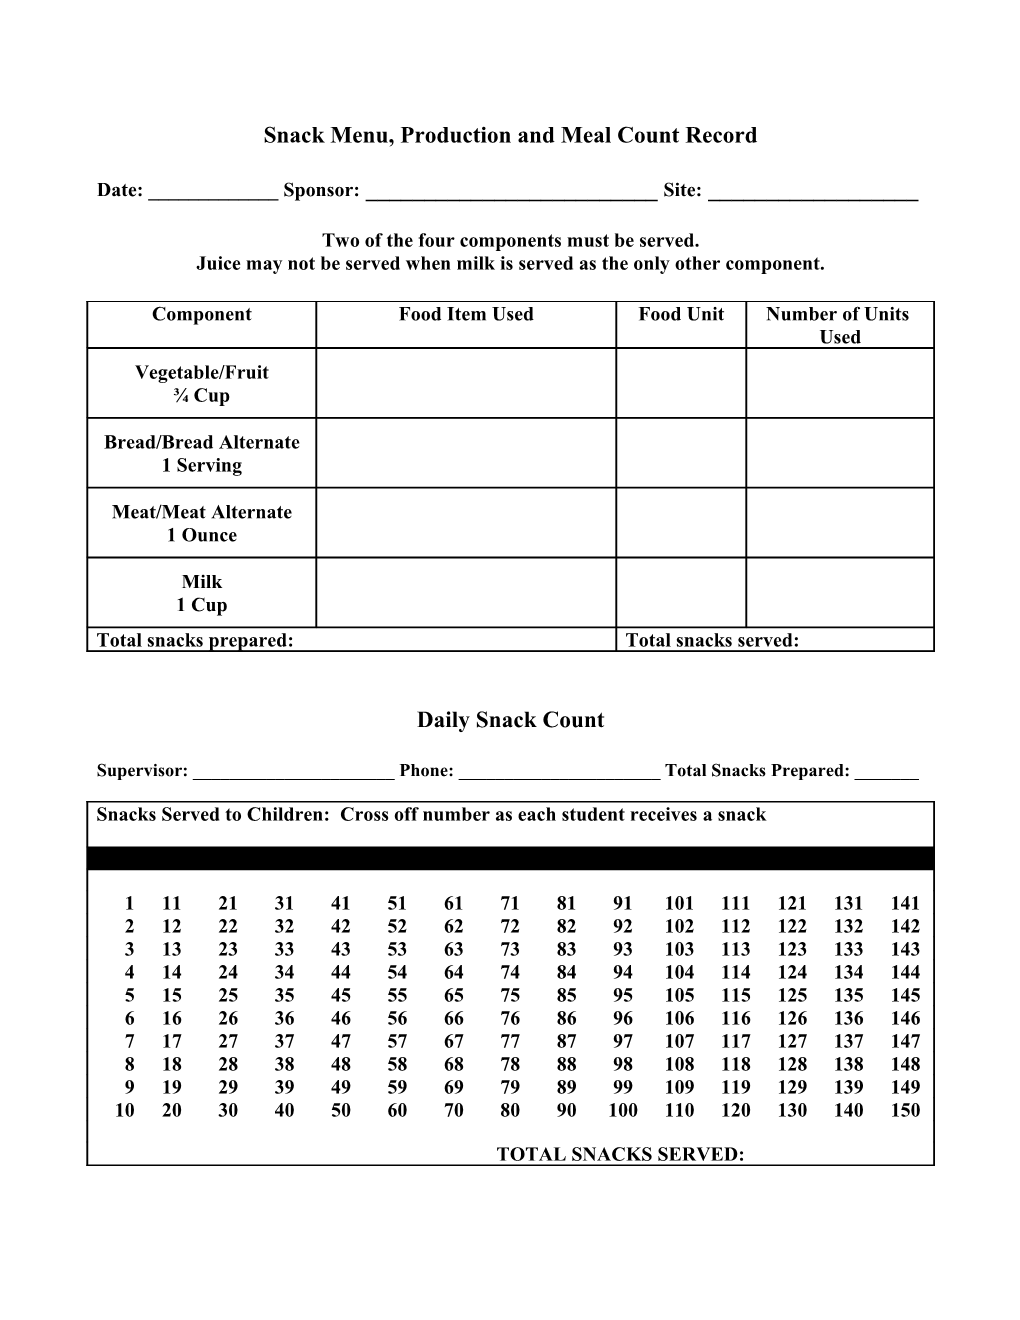 Snack Menu, Production and Meal Count Record